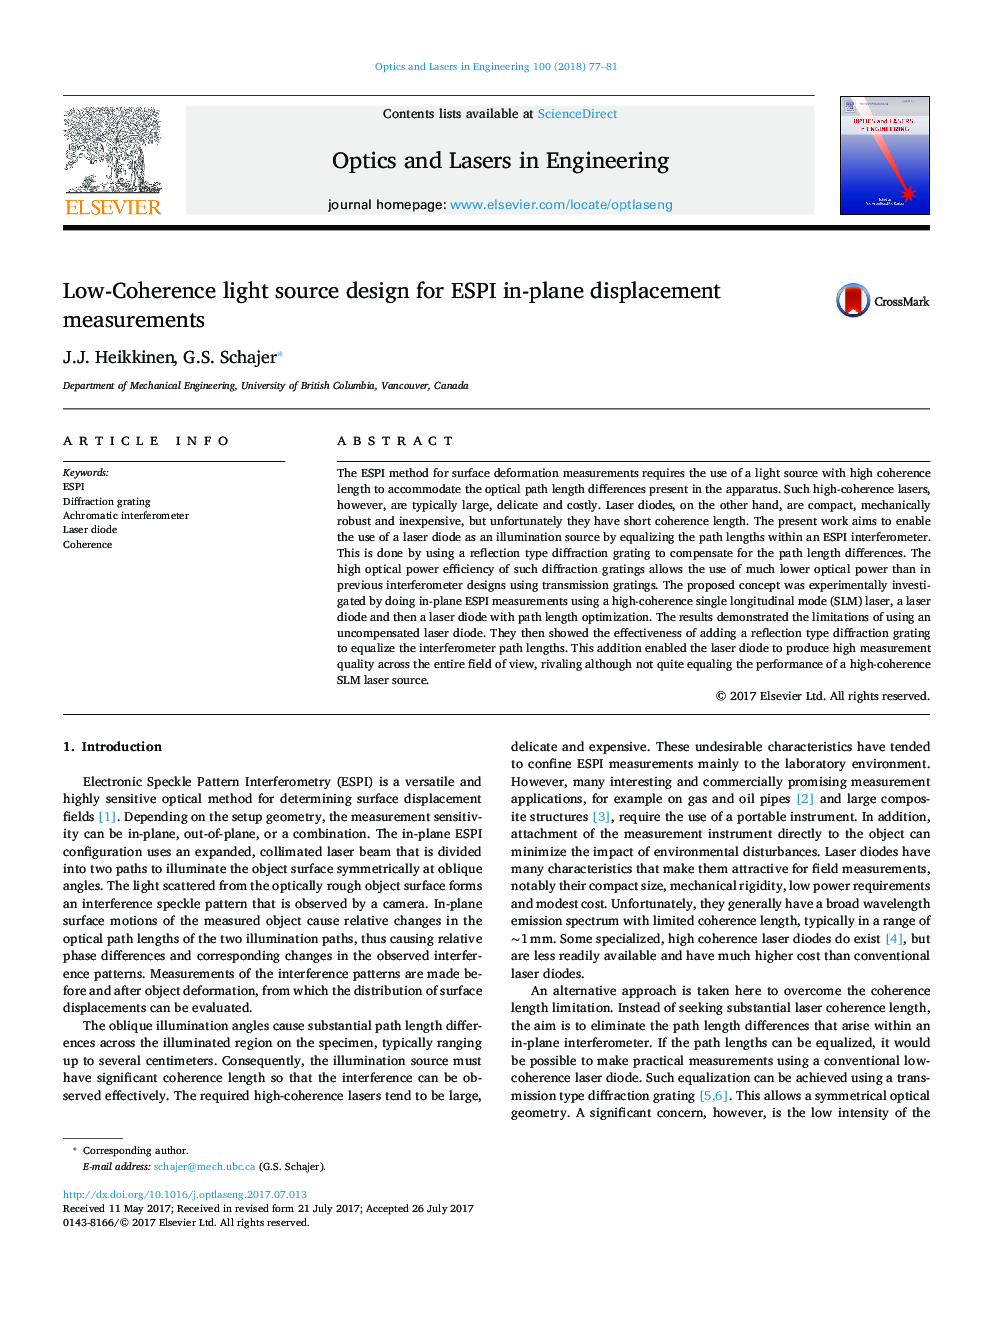 Low-Coherence light source design for ESPI in-plane displacement measurements